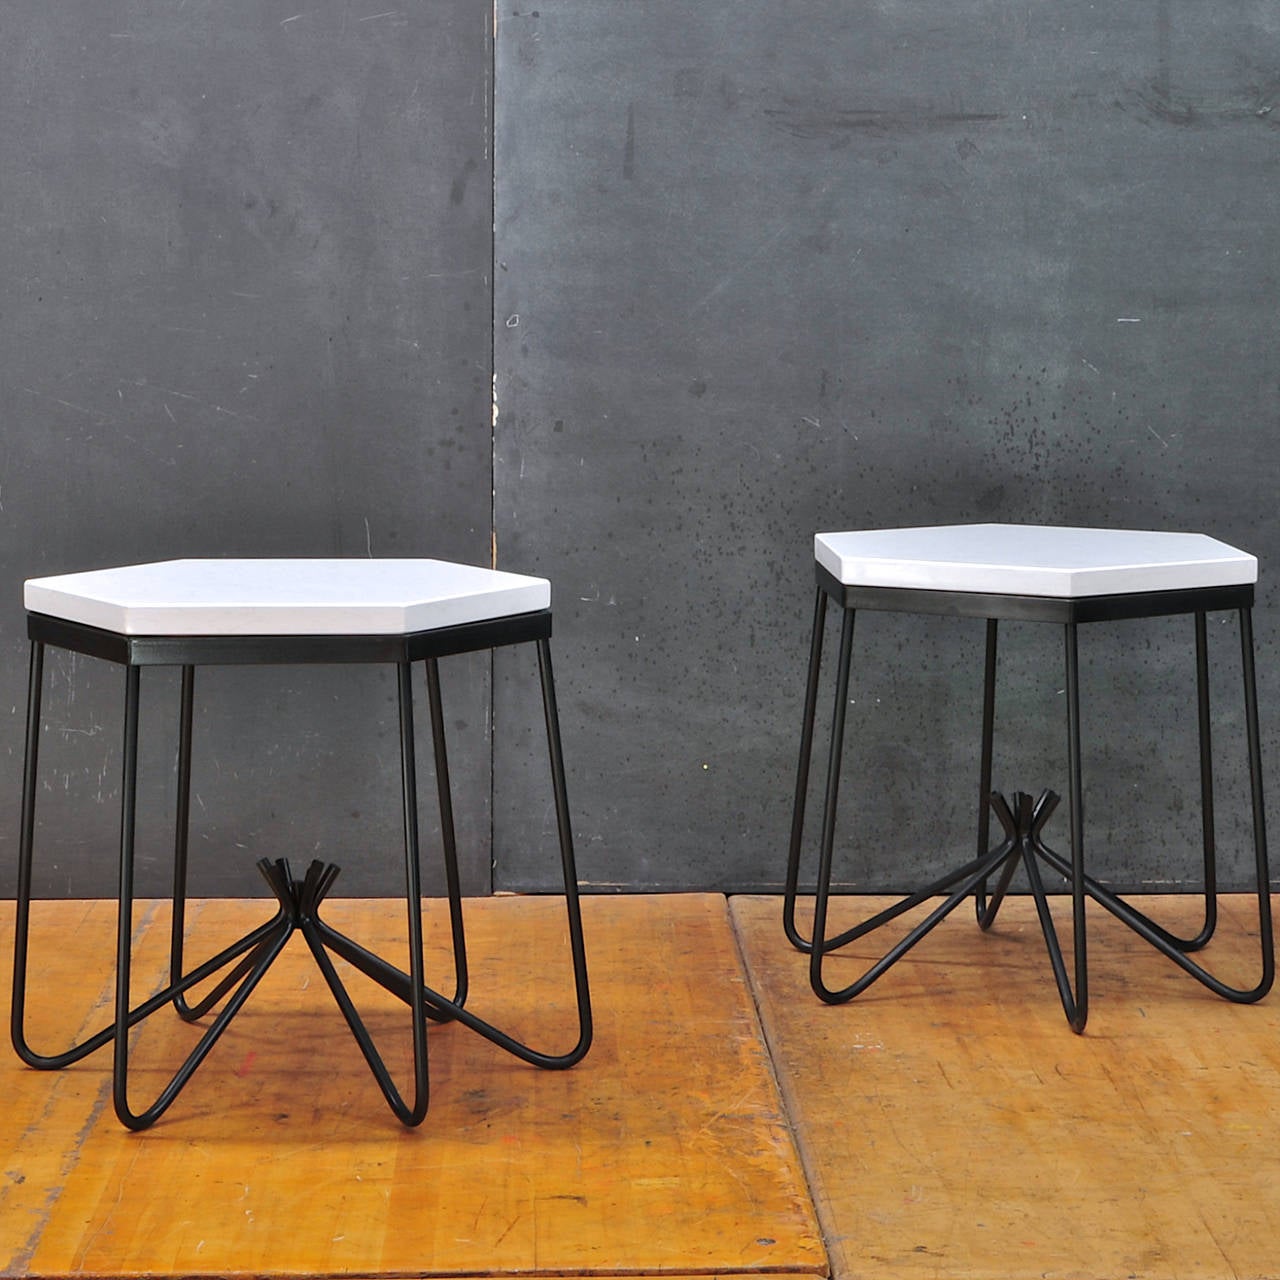 Jean Royere style Hirondelle Side Table, Iron Rod with Newly Cut Hexagonal Marble Tops, Excellent Construction. No Chips, Excellent Condition. Sold per piece.

W: 21 x D: 21 x H: 19½ in.